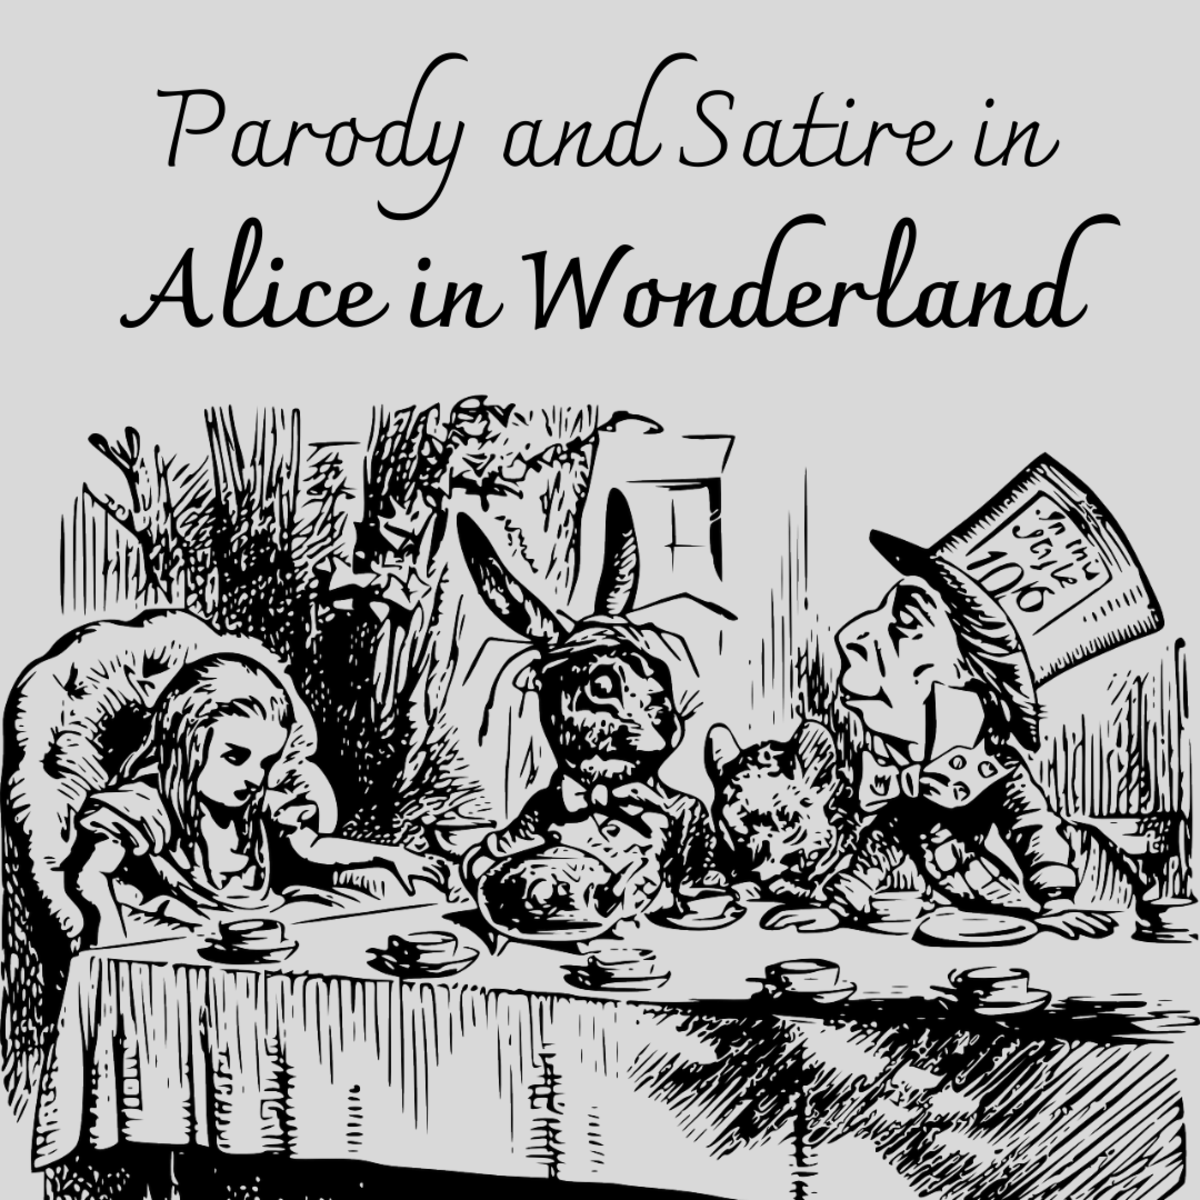 Alice's London Adventures in Wonderland: A Parody by Carroll S Beaumont Lewis 